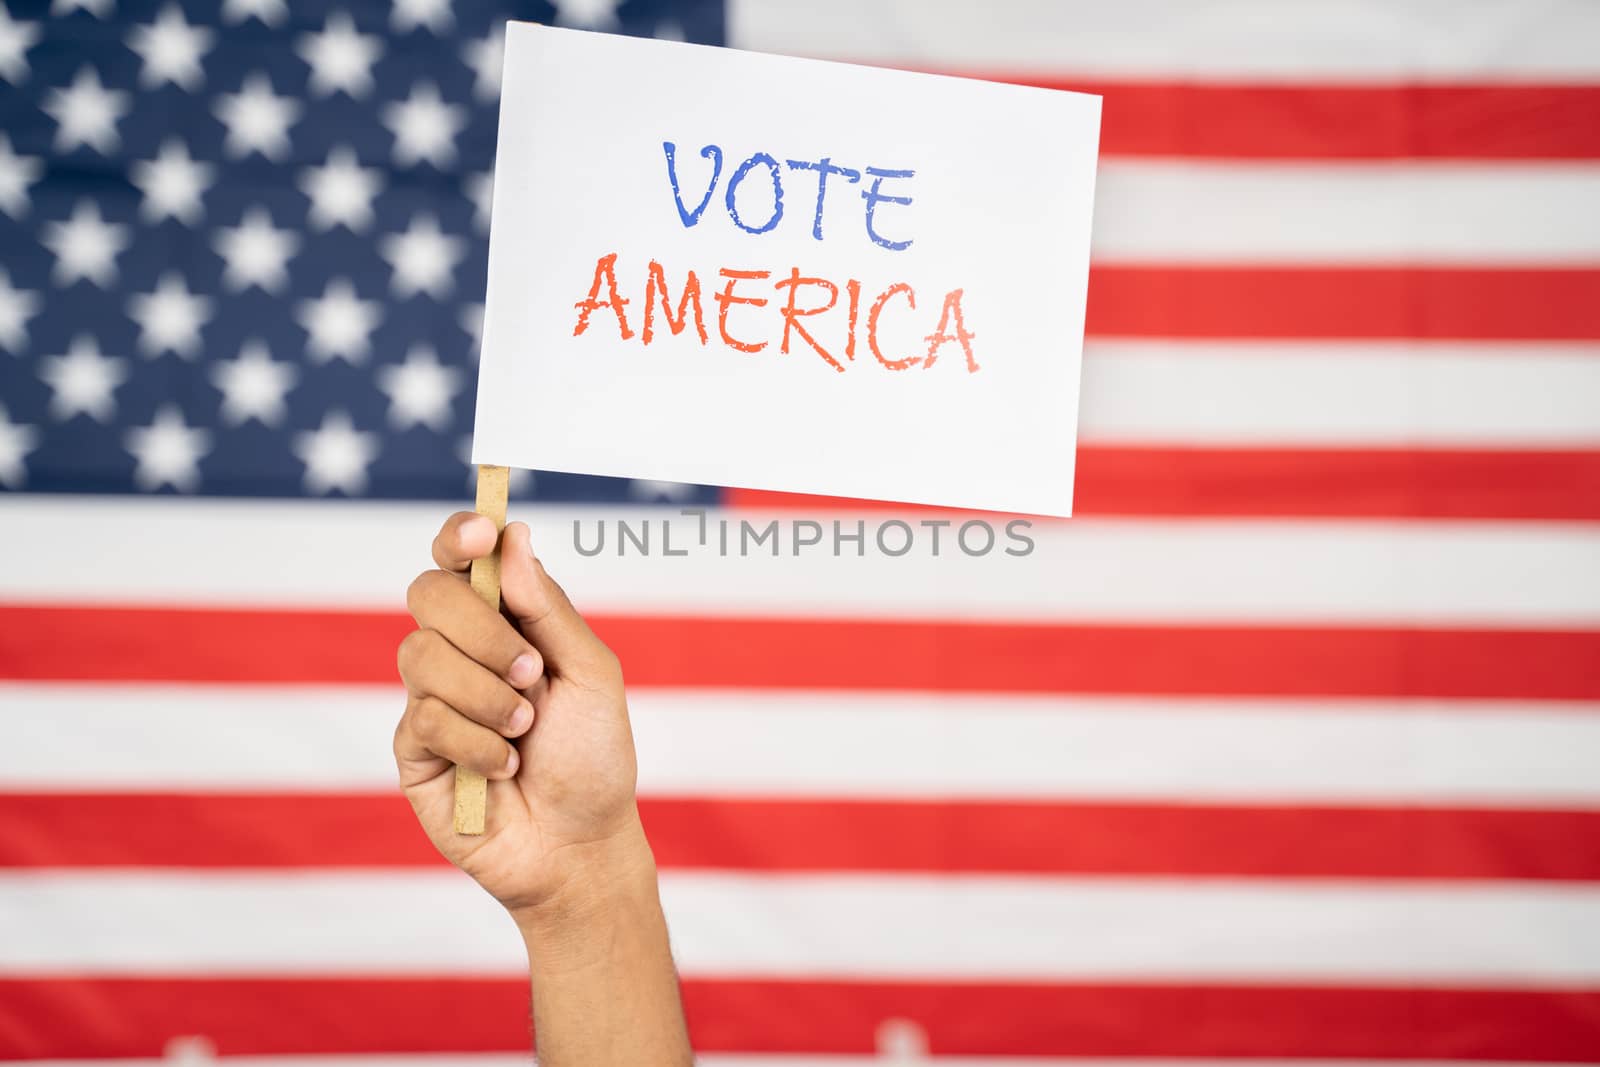 Hand Holding Vote America Sign boards with US Flag as Background - Concept of US election and Importance of Voting